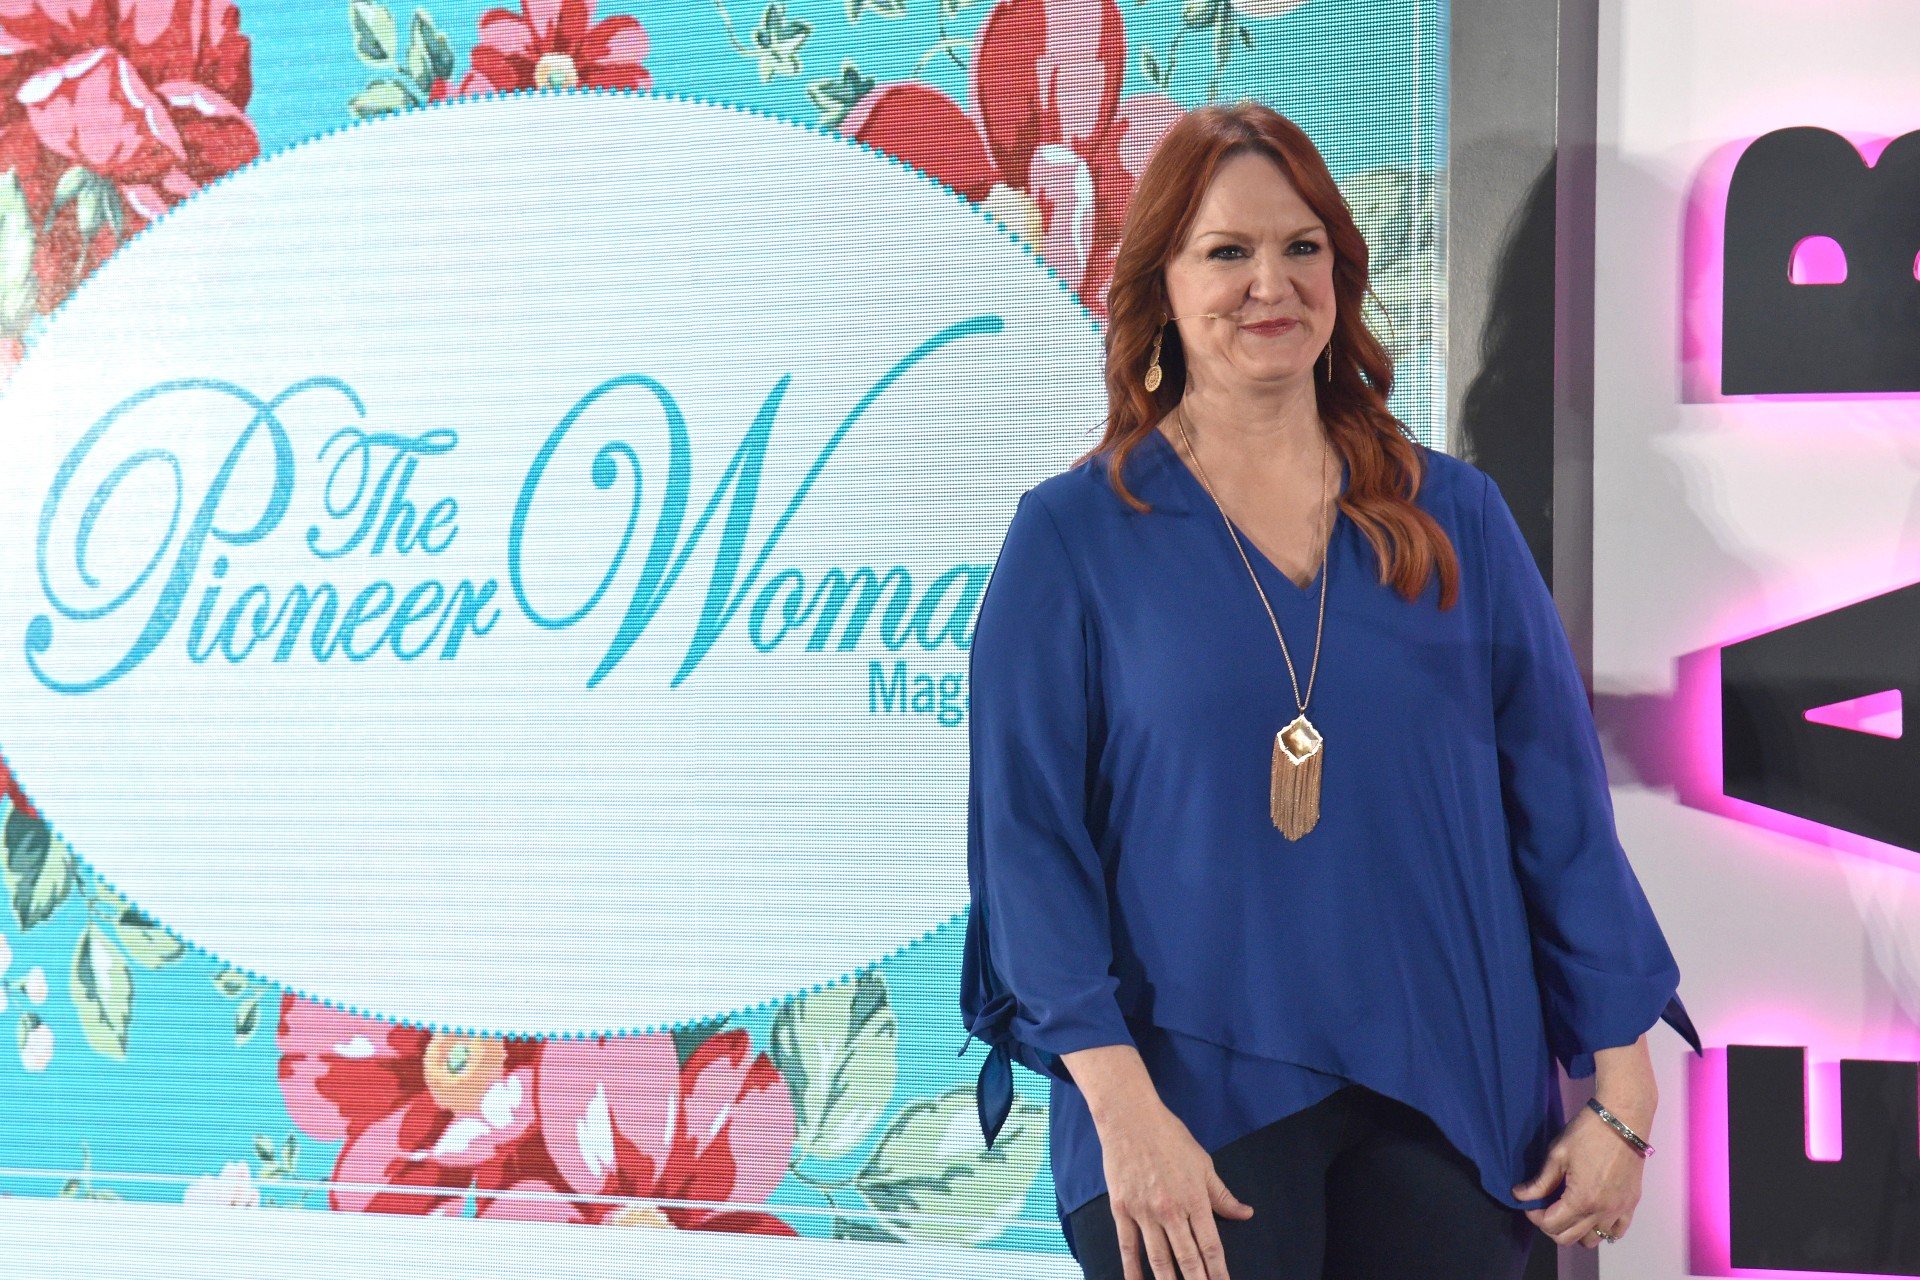 Ree Drummond wears a blue blouse does a presentation for Heart magazines.